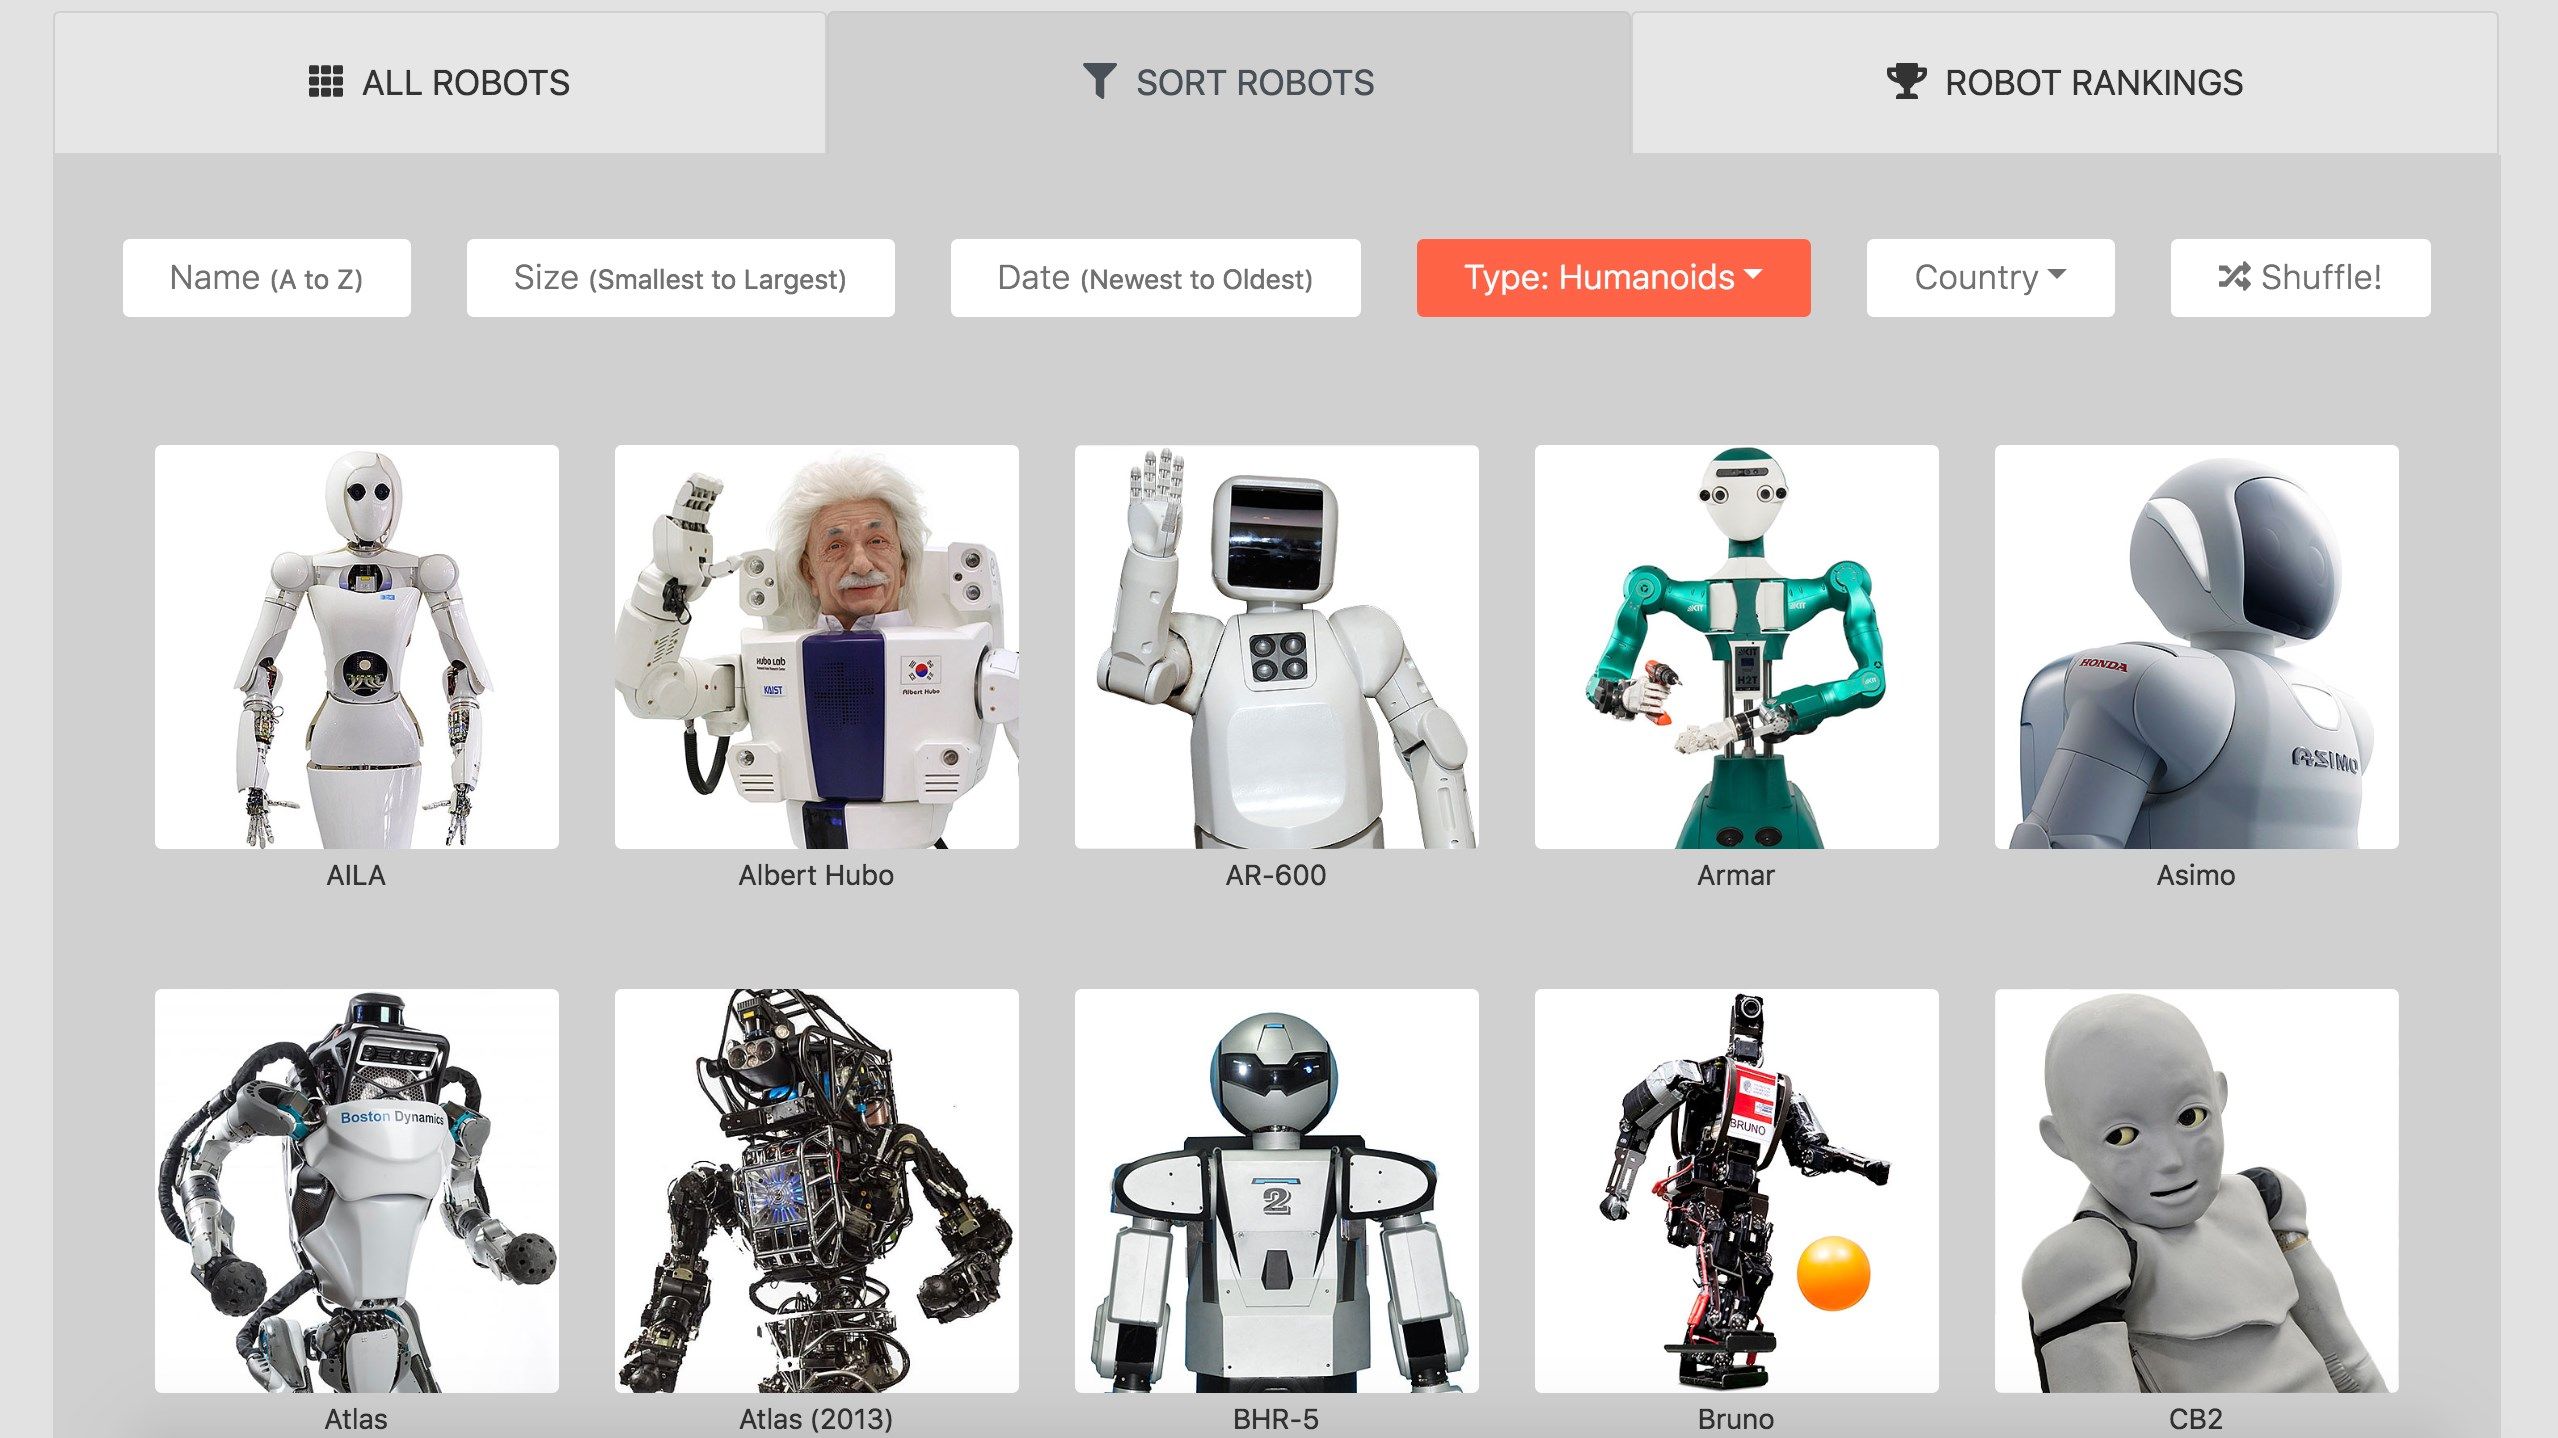 Sort robots by type: humanoids, drones, education, and more